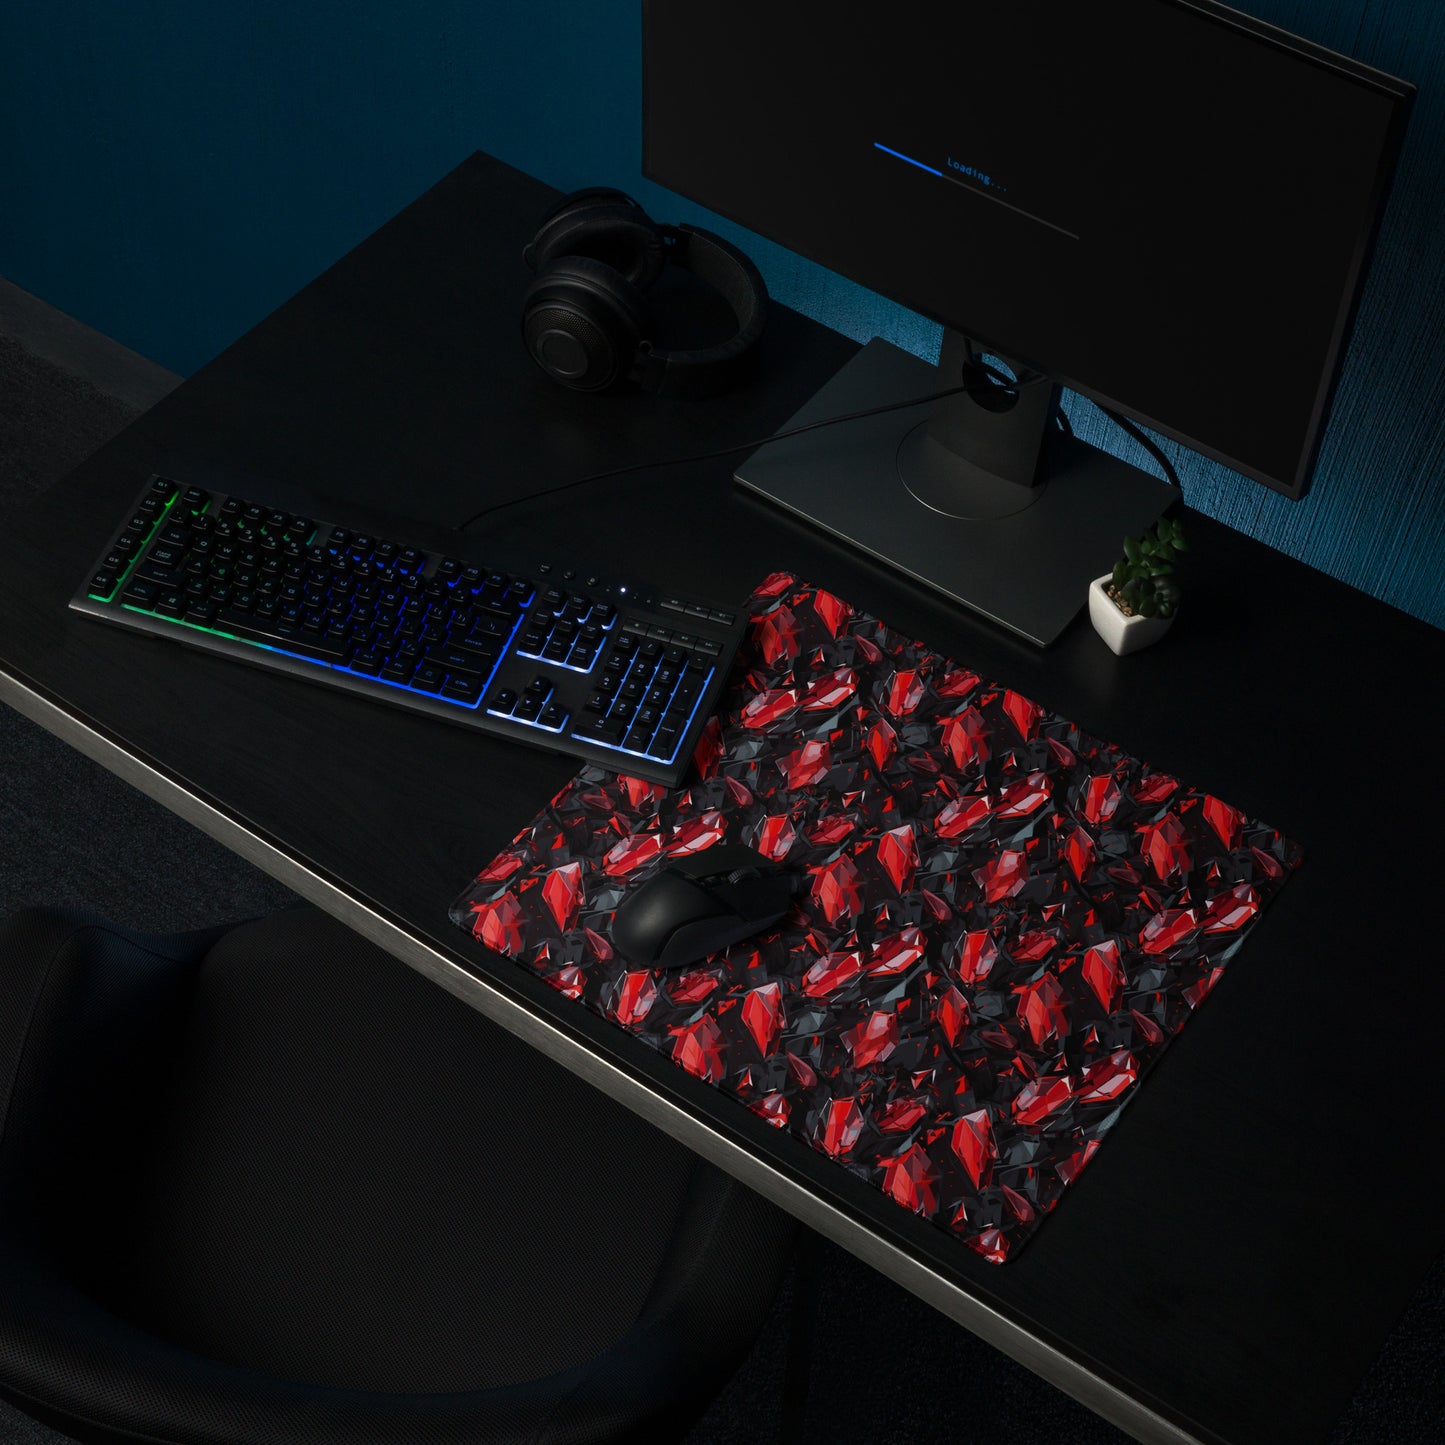 An 18" x 16" gaming desk pad with black and red crystals. It sits on a black desk with a keyboard, monitor, and mouse.